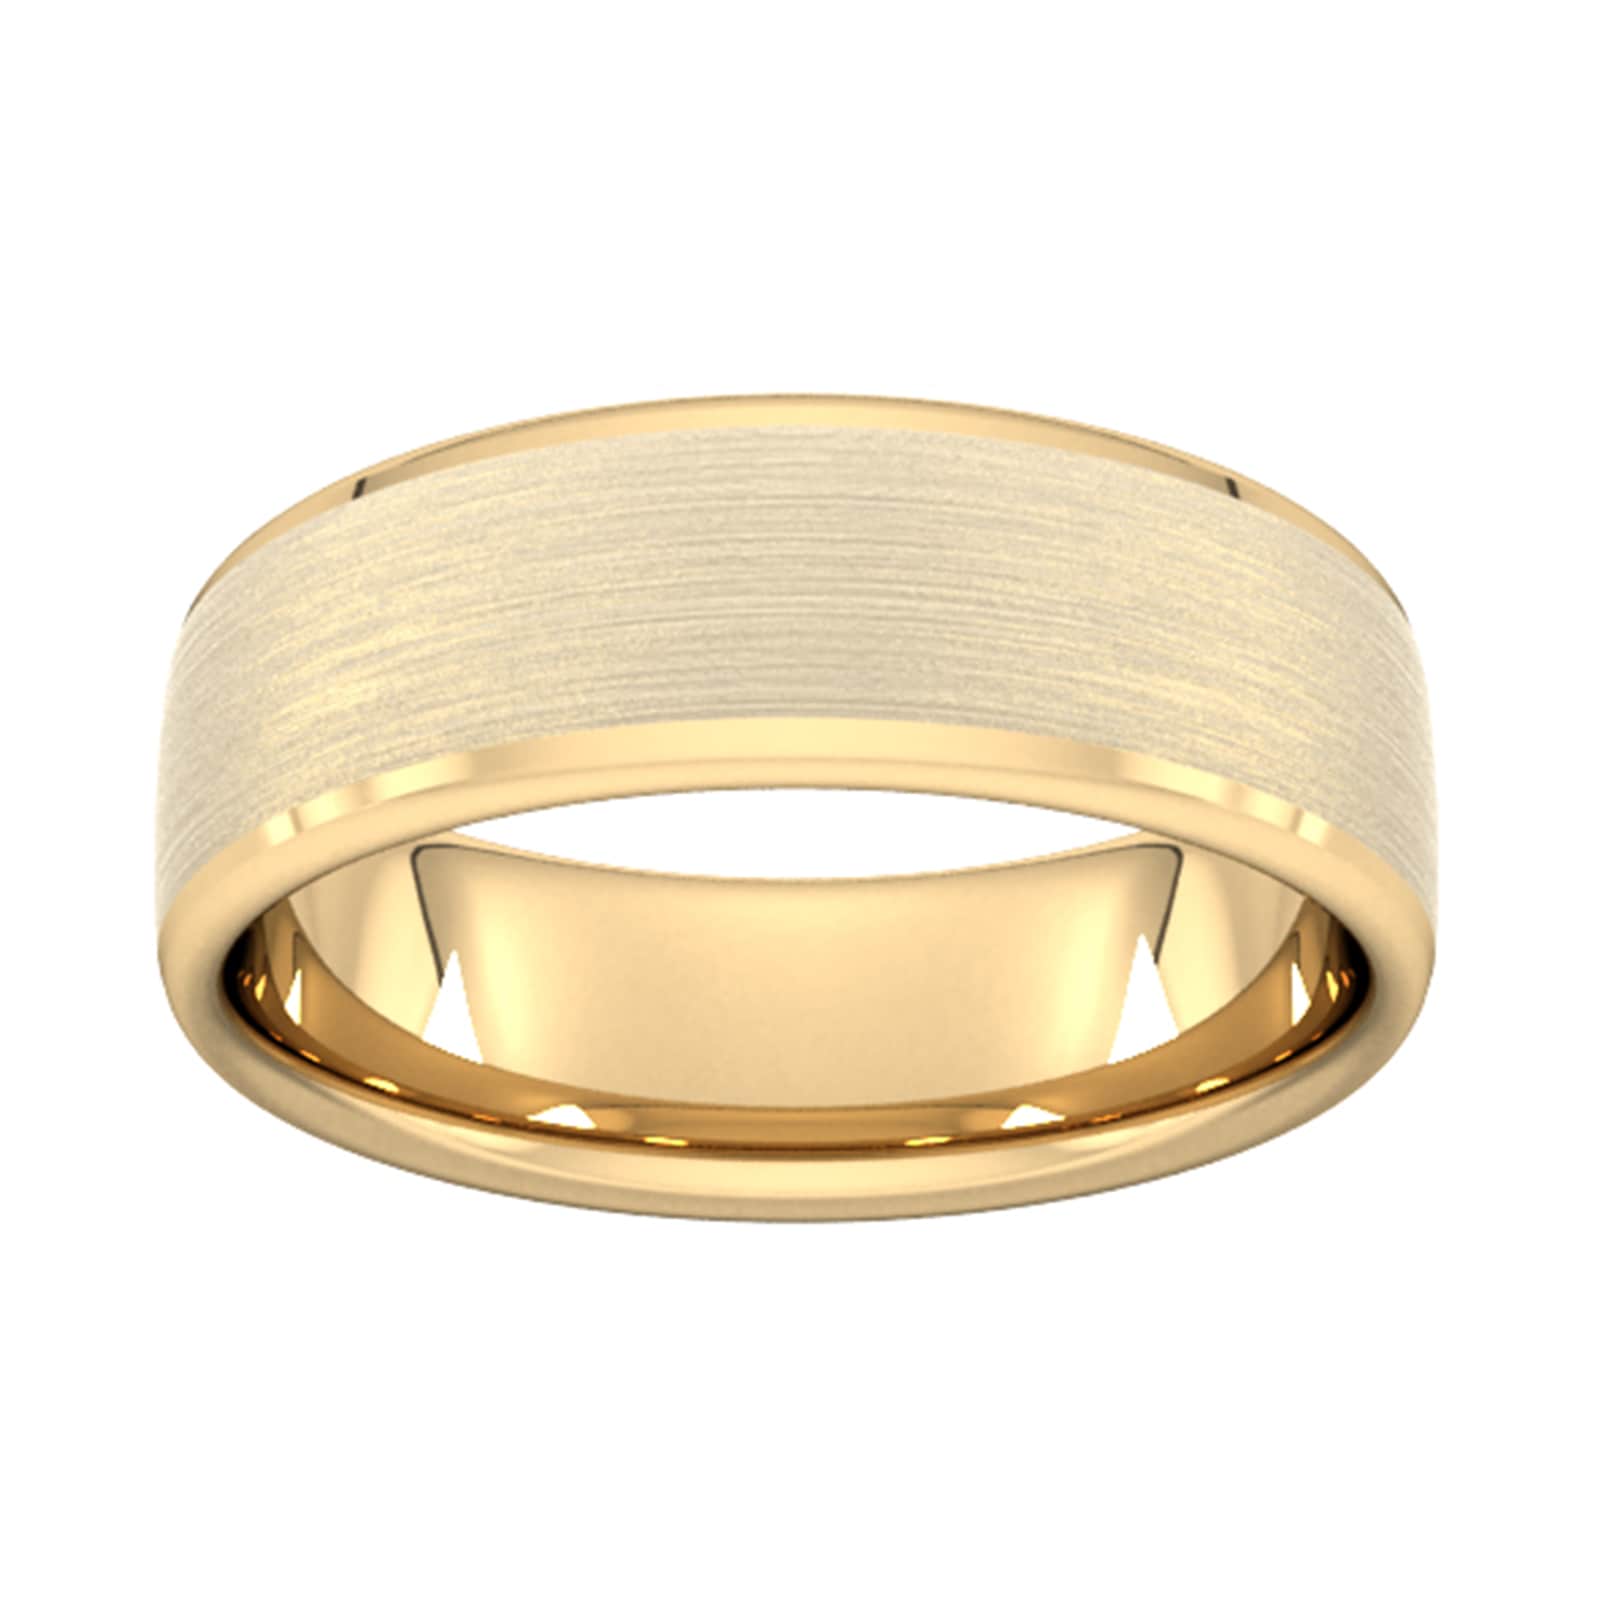 7mm Traditional Court Heavy Polished Chamfered Edges With Matt Centre Wedding Ring In 9 Carat Yellow Gold - Ring Size K